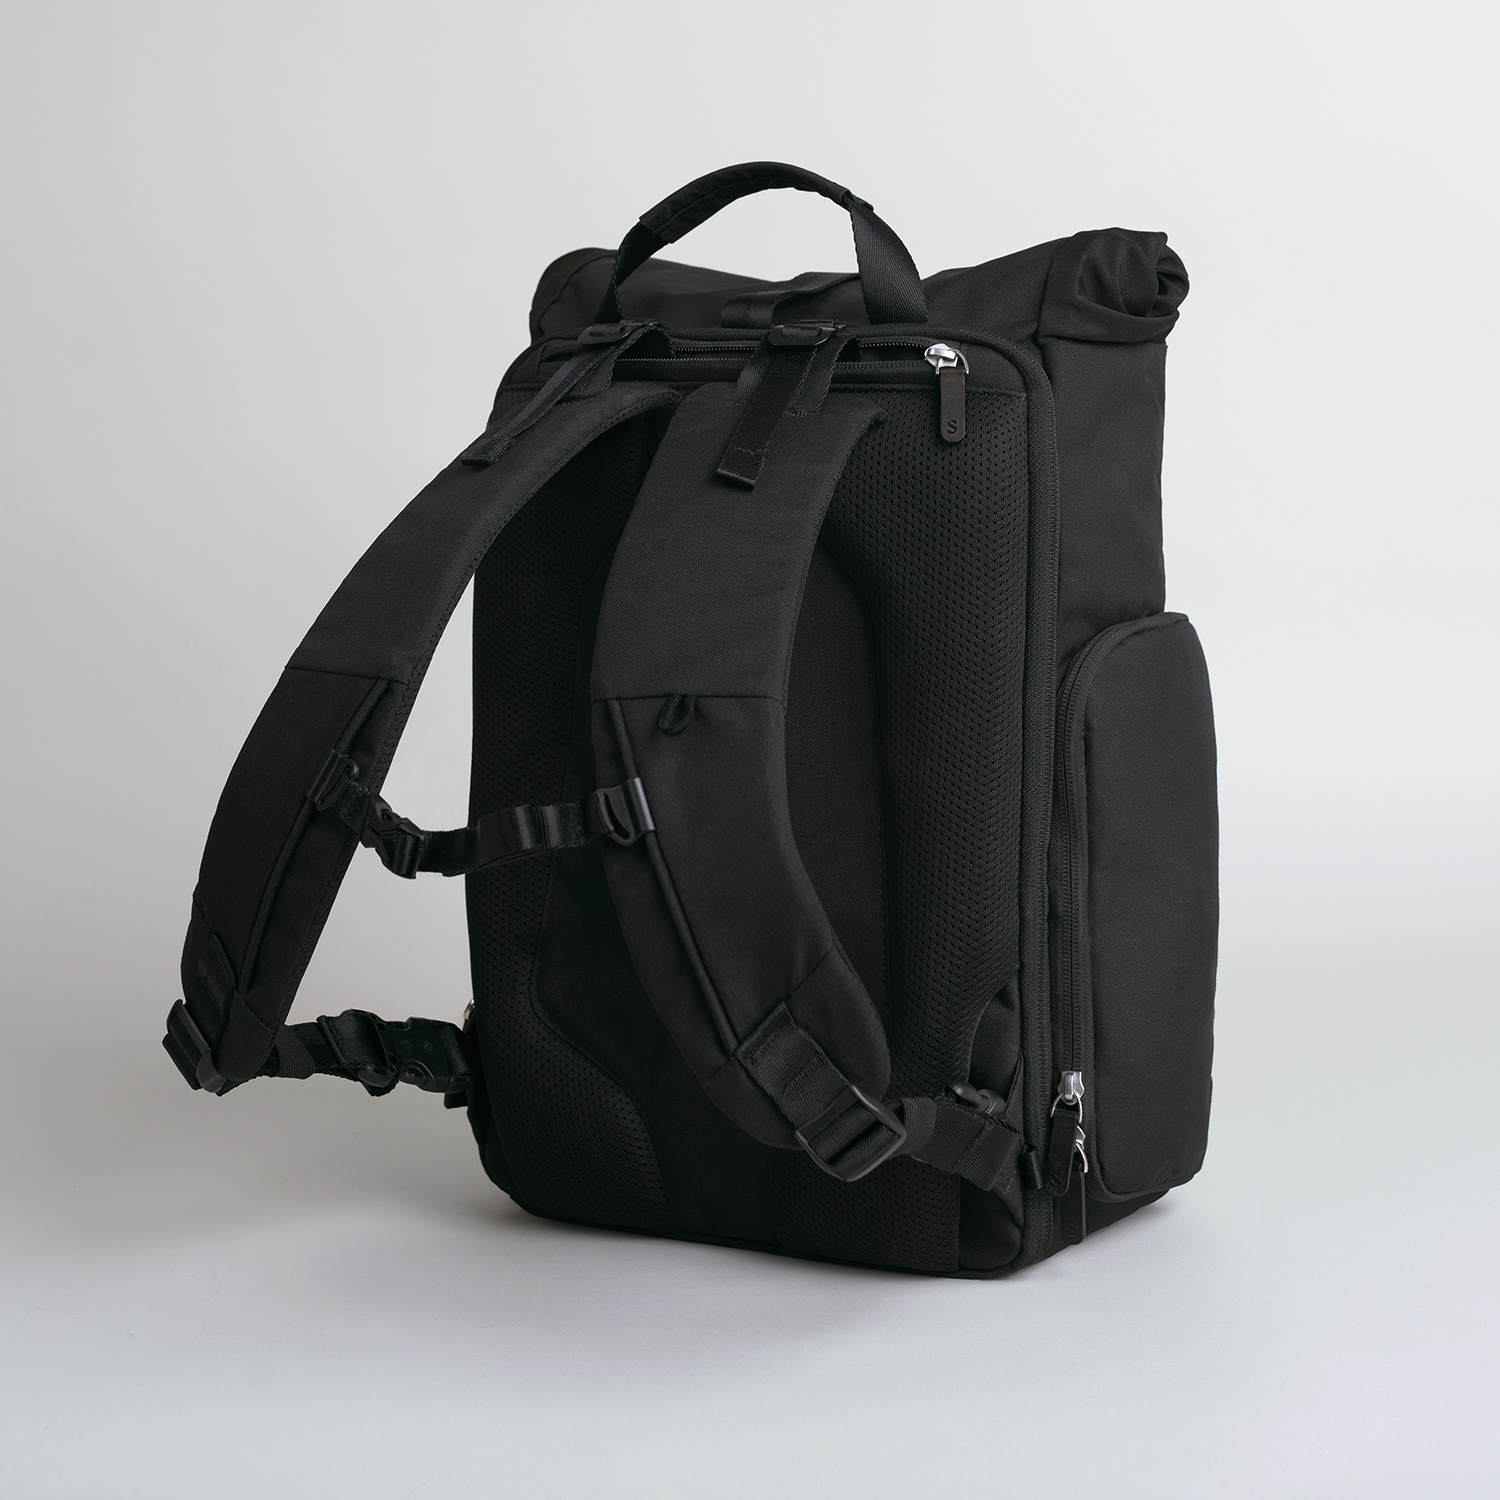 Athlete Commuting Backpack for Runners and Cyclists - Roll-top | Stolt